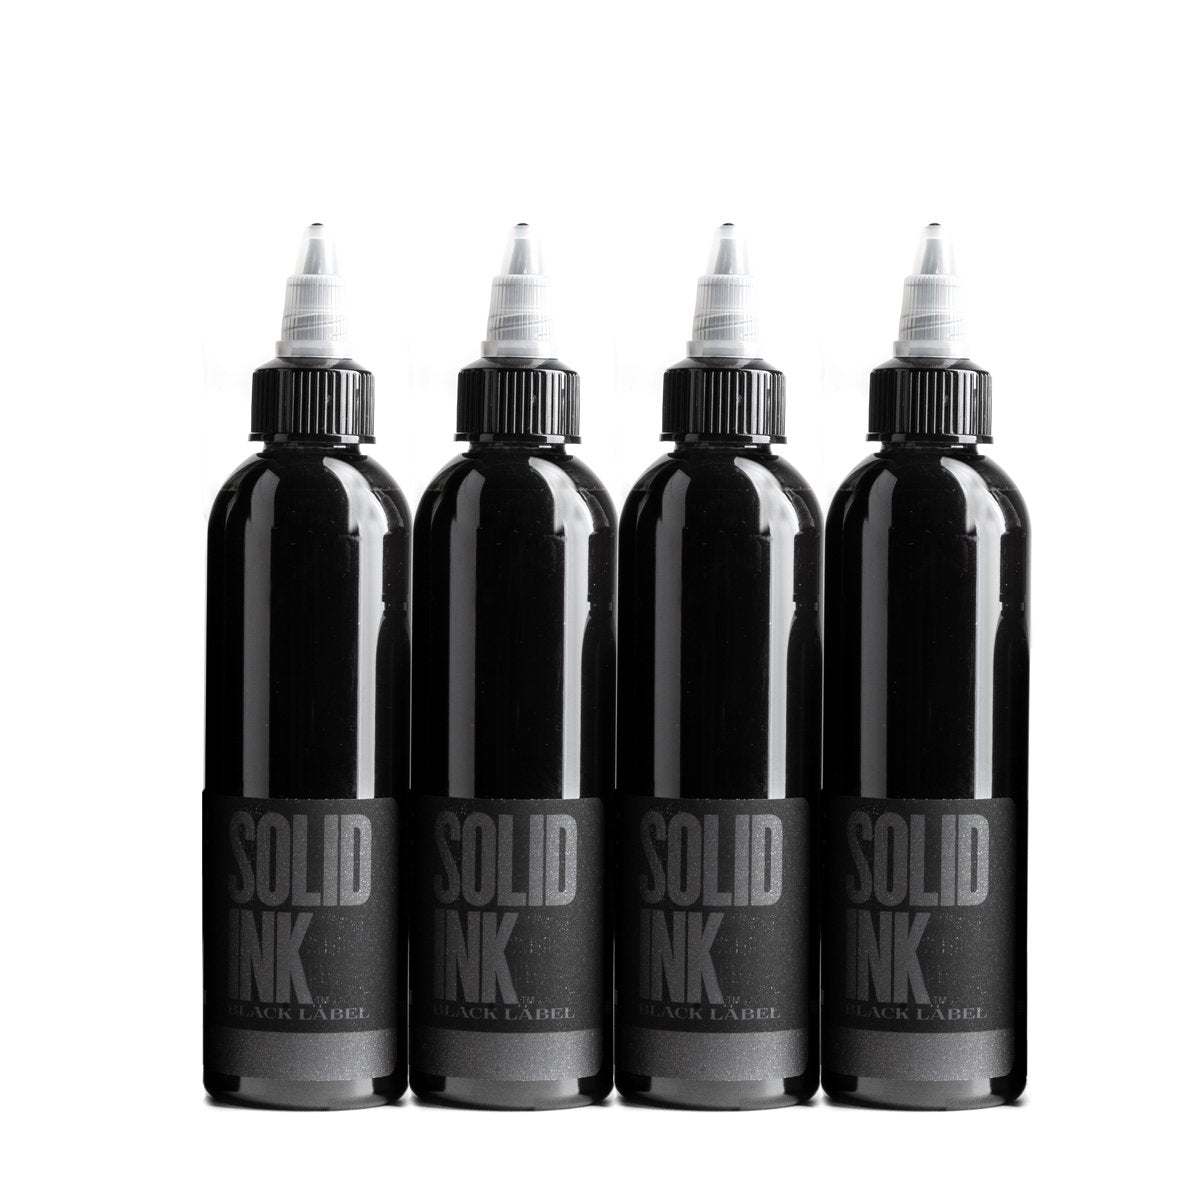 Solid ink Black Label | Grey Wash Set-Tattoo Ink-Solid Ink-FYT Tattoo Supplies New York